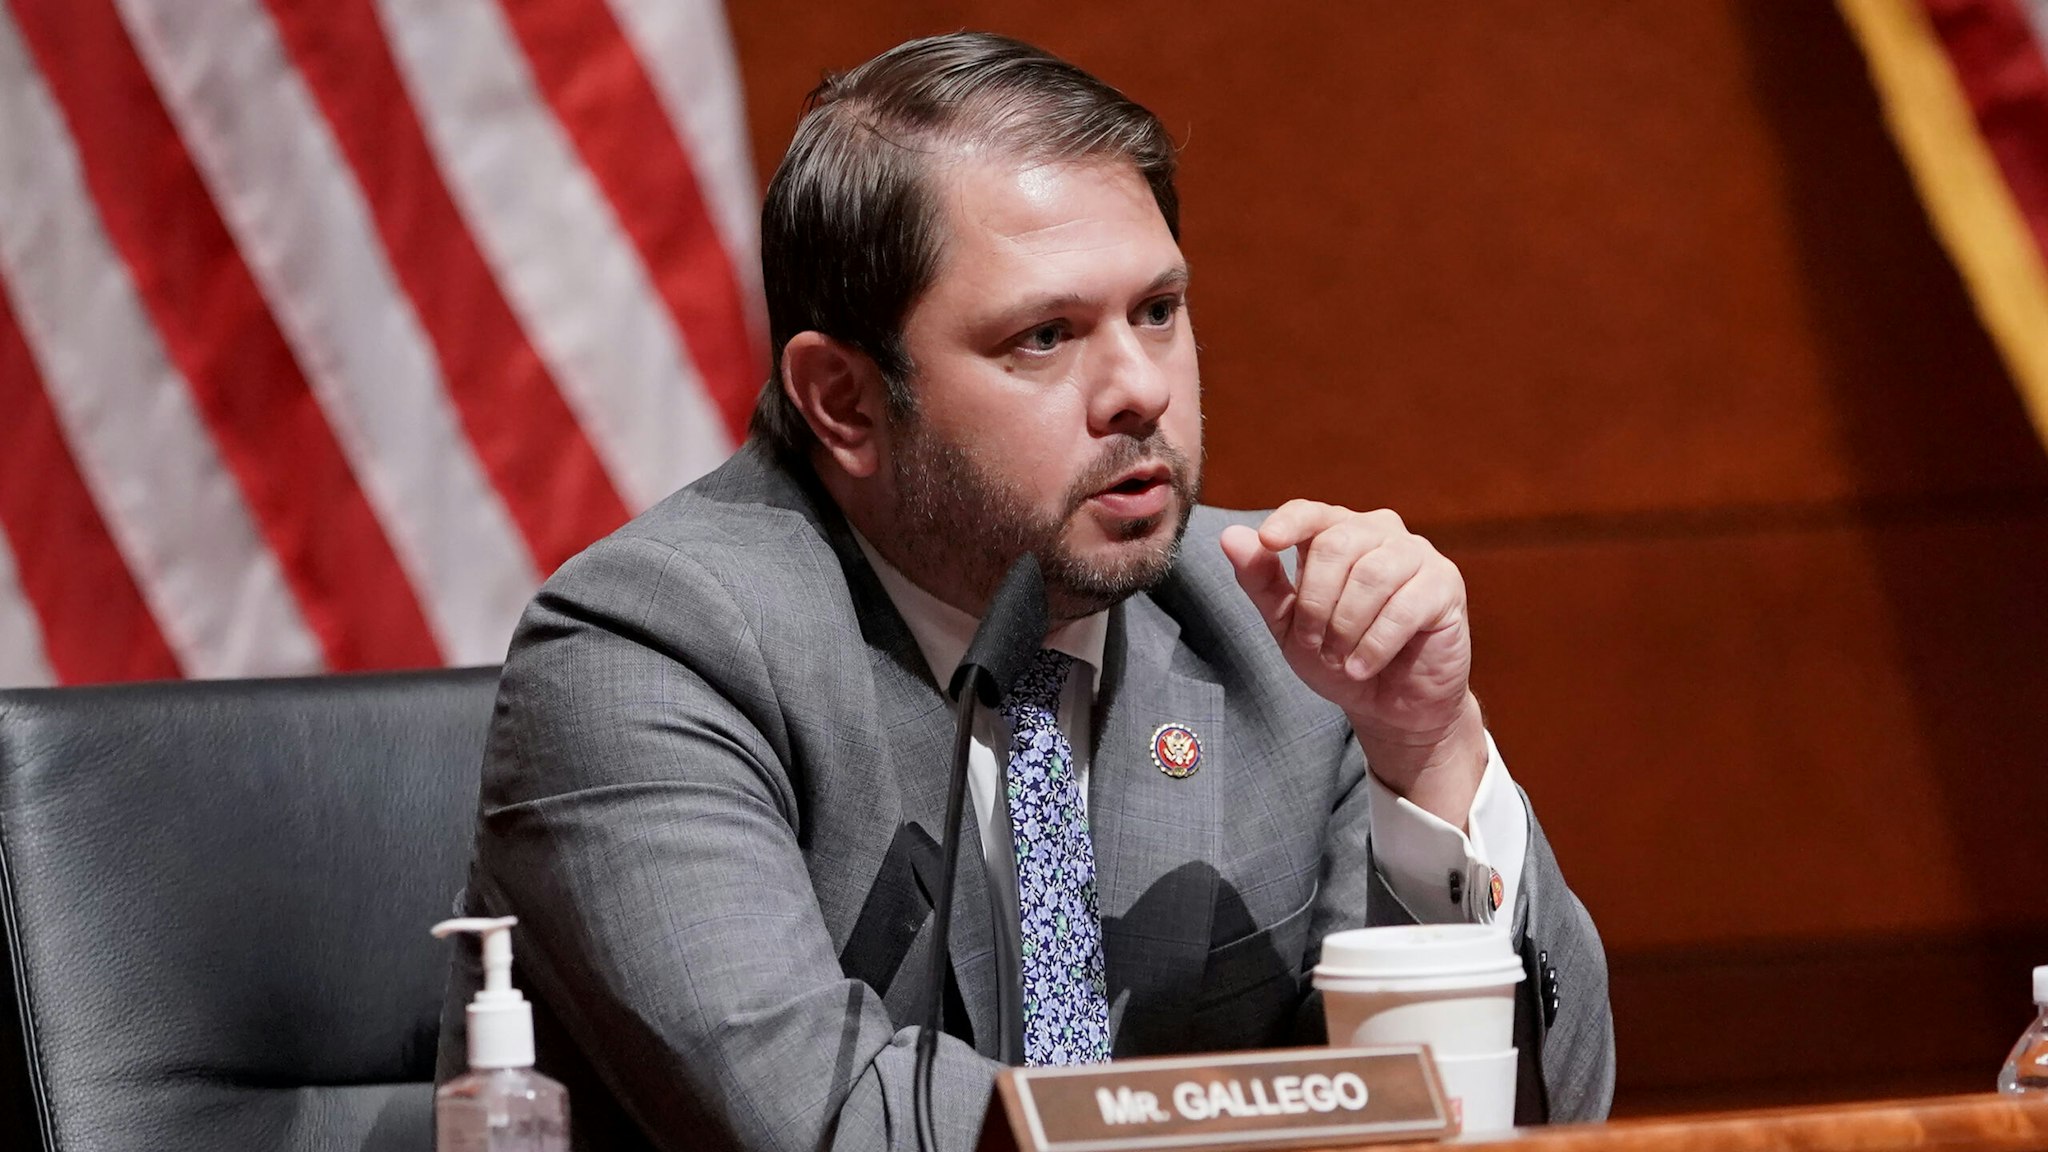 Representative Ruben Gallego, a Democrat from Arizona, speaks during a House Armed Services Committee hearing in Washington, D.C., U.S, on Thursday, July 9, 2020. The hearing is titled Department of Defense Authorities and Roles Related to Civilian Law Enforcement.